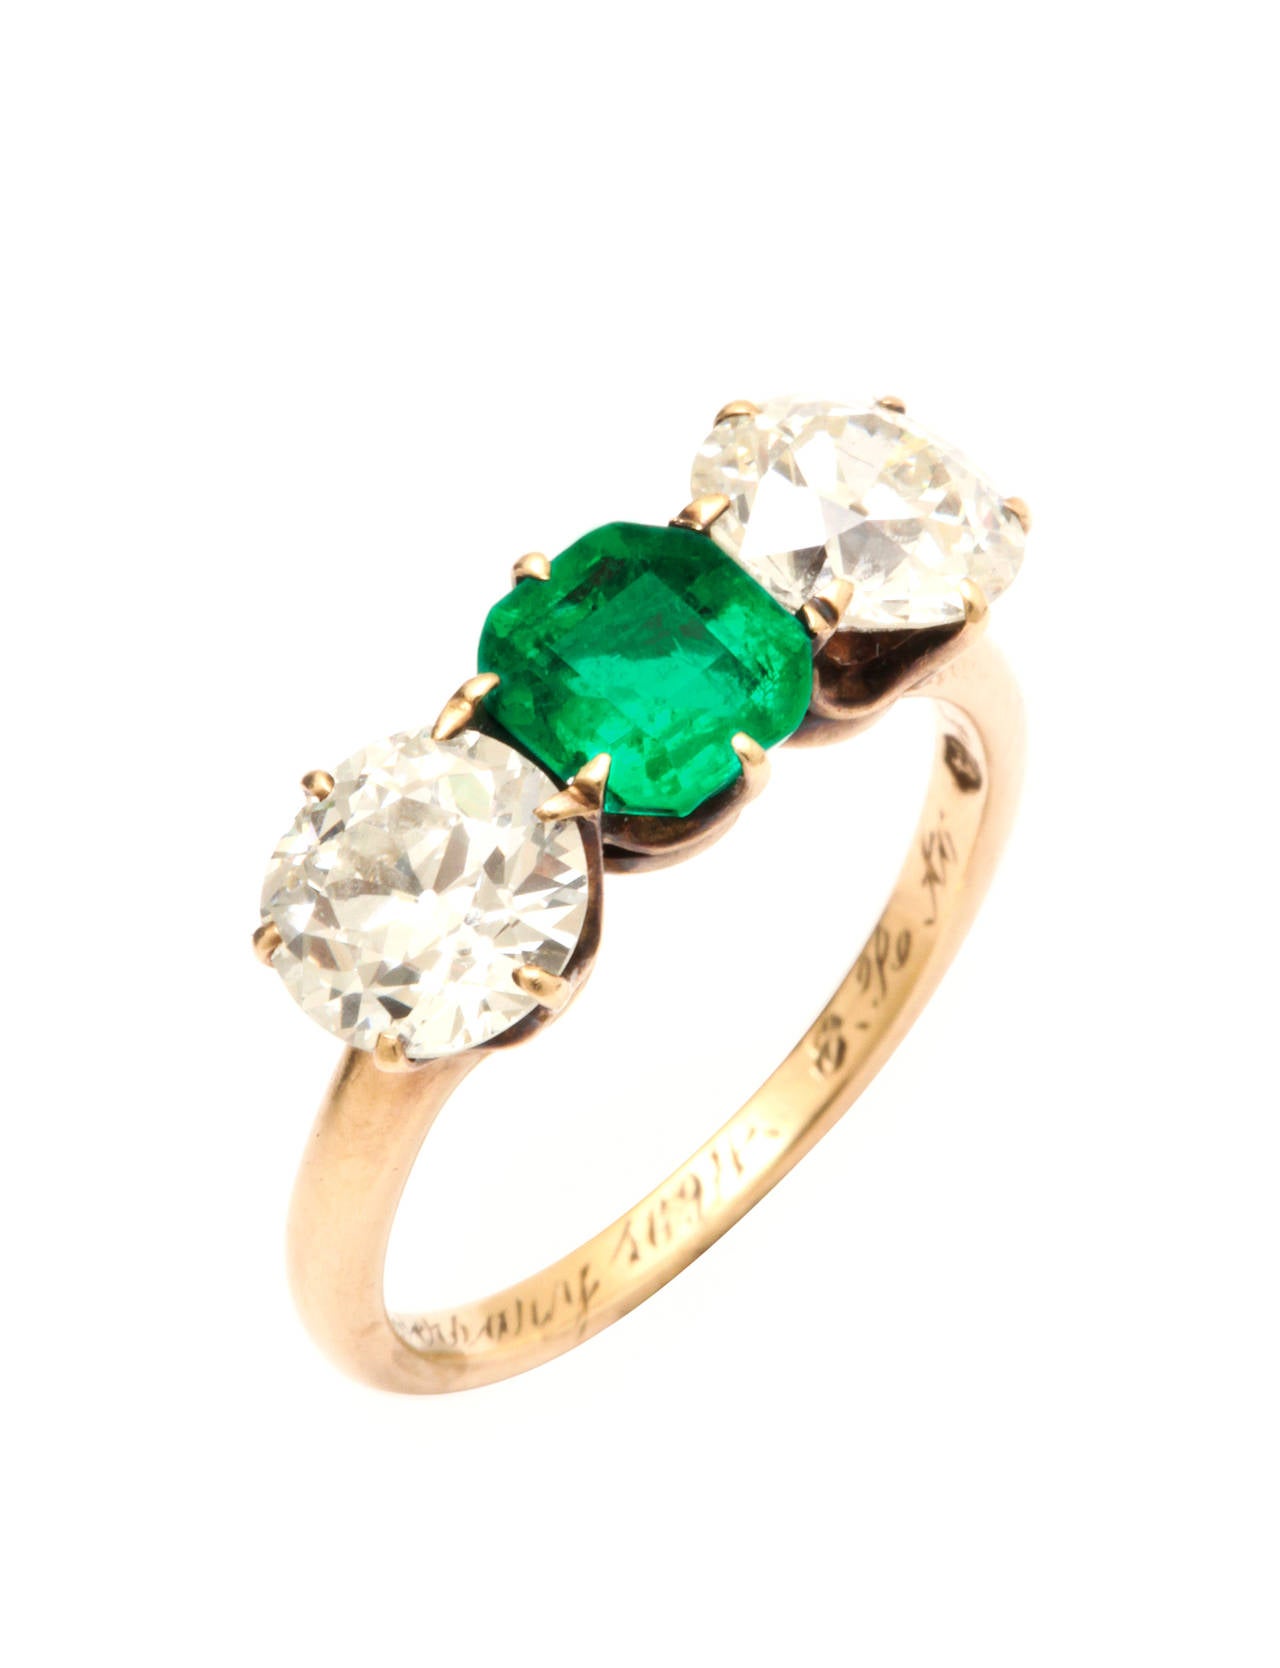 This Edwardian Emerald and Diamond ring is set in 14K yellow gold. 

Estimated diamond weight: 2.49ct total, I - J color, VVS clarity

Estimated emerald weight: 0.95ct, Columbian origin

Size 7.5

Engraving on inner band reads, 